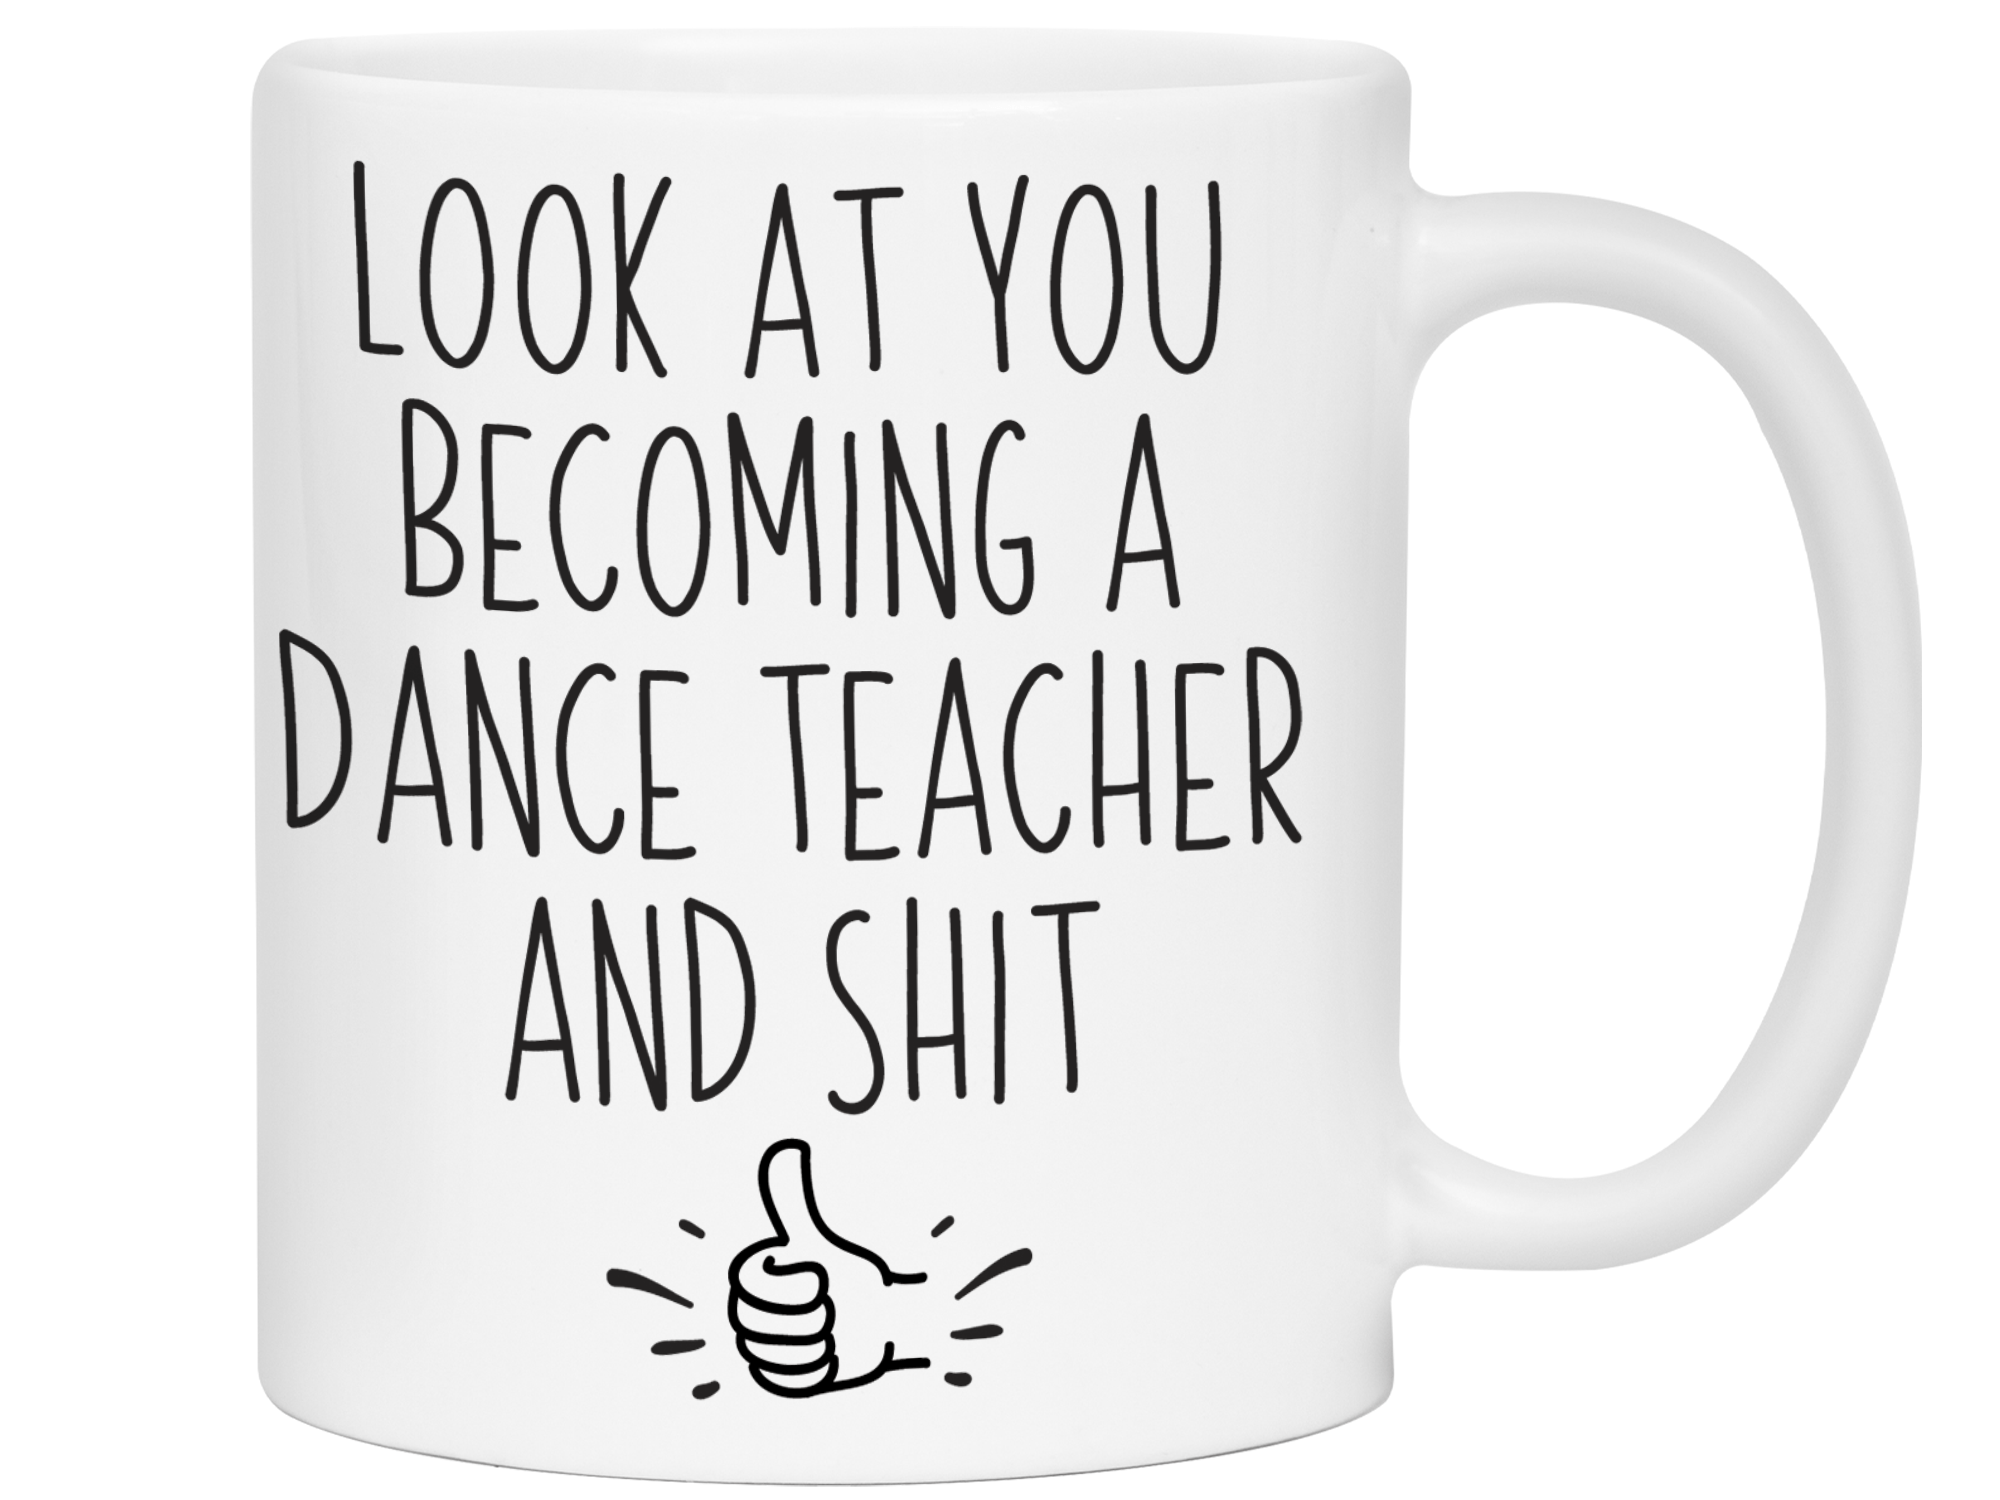 Graduation Gifts for Dance Teachers - Look at You Becoming a Dance Teacher and Shit Funny Coffee Mug